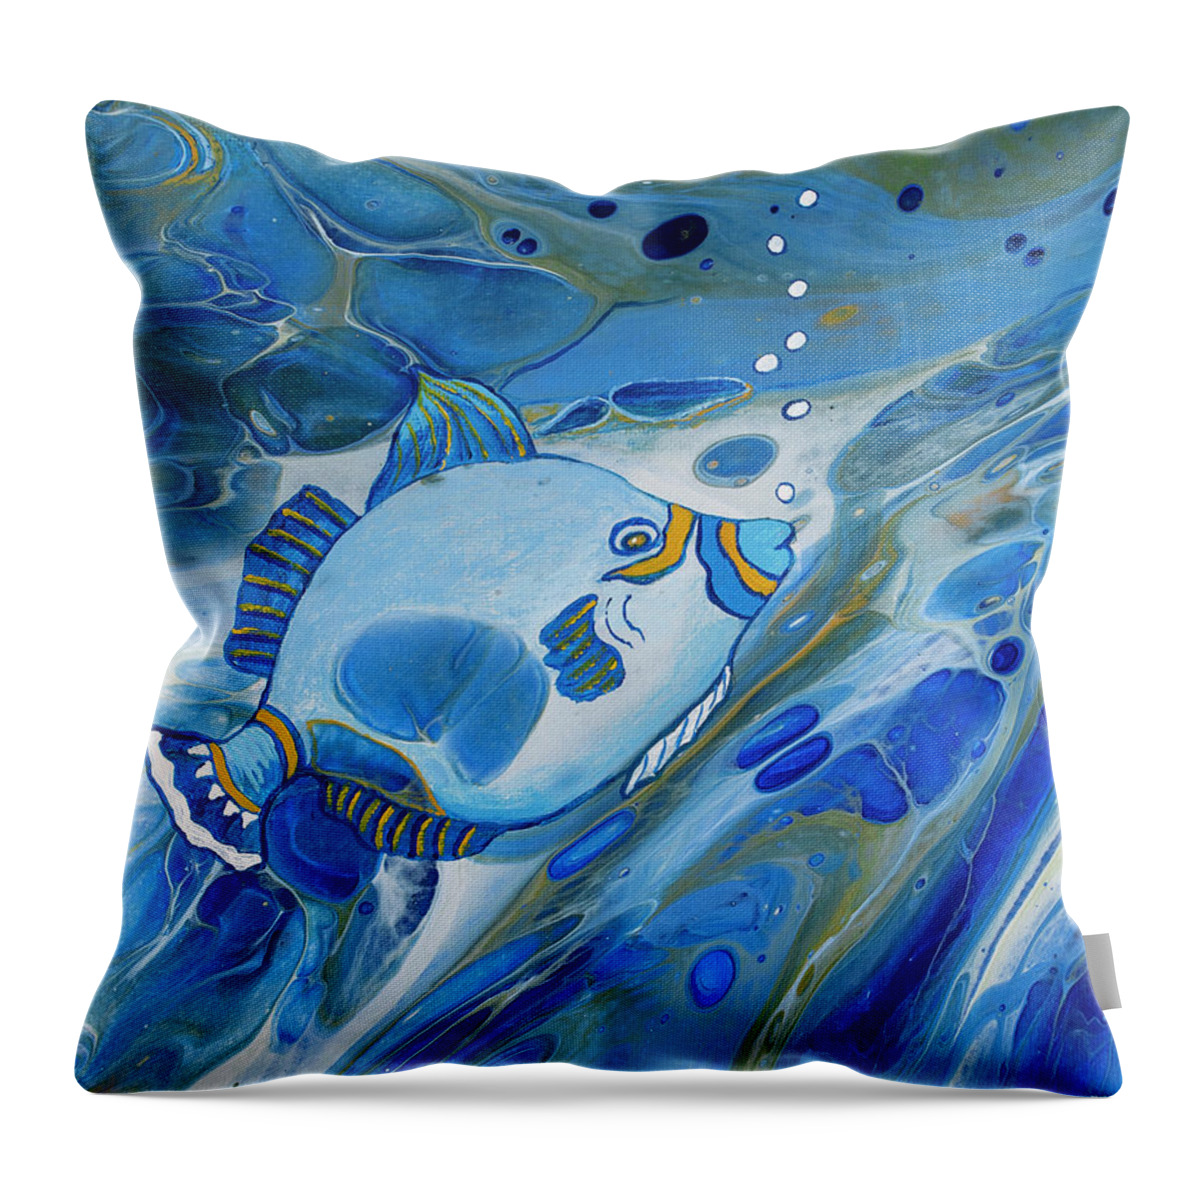 Fish Throw Pillow featuring the painting Butterflyfish by Darice Machel McGuire